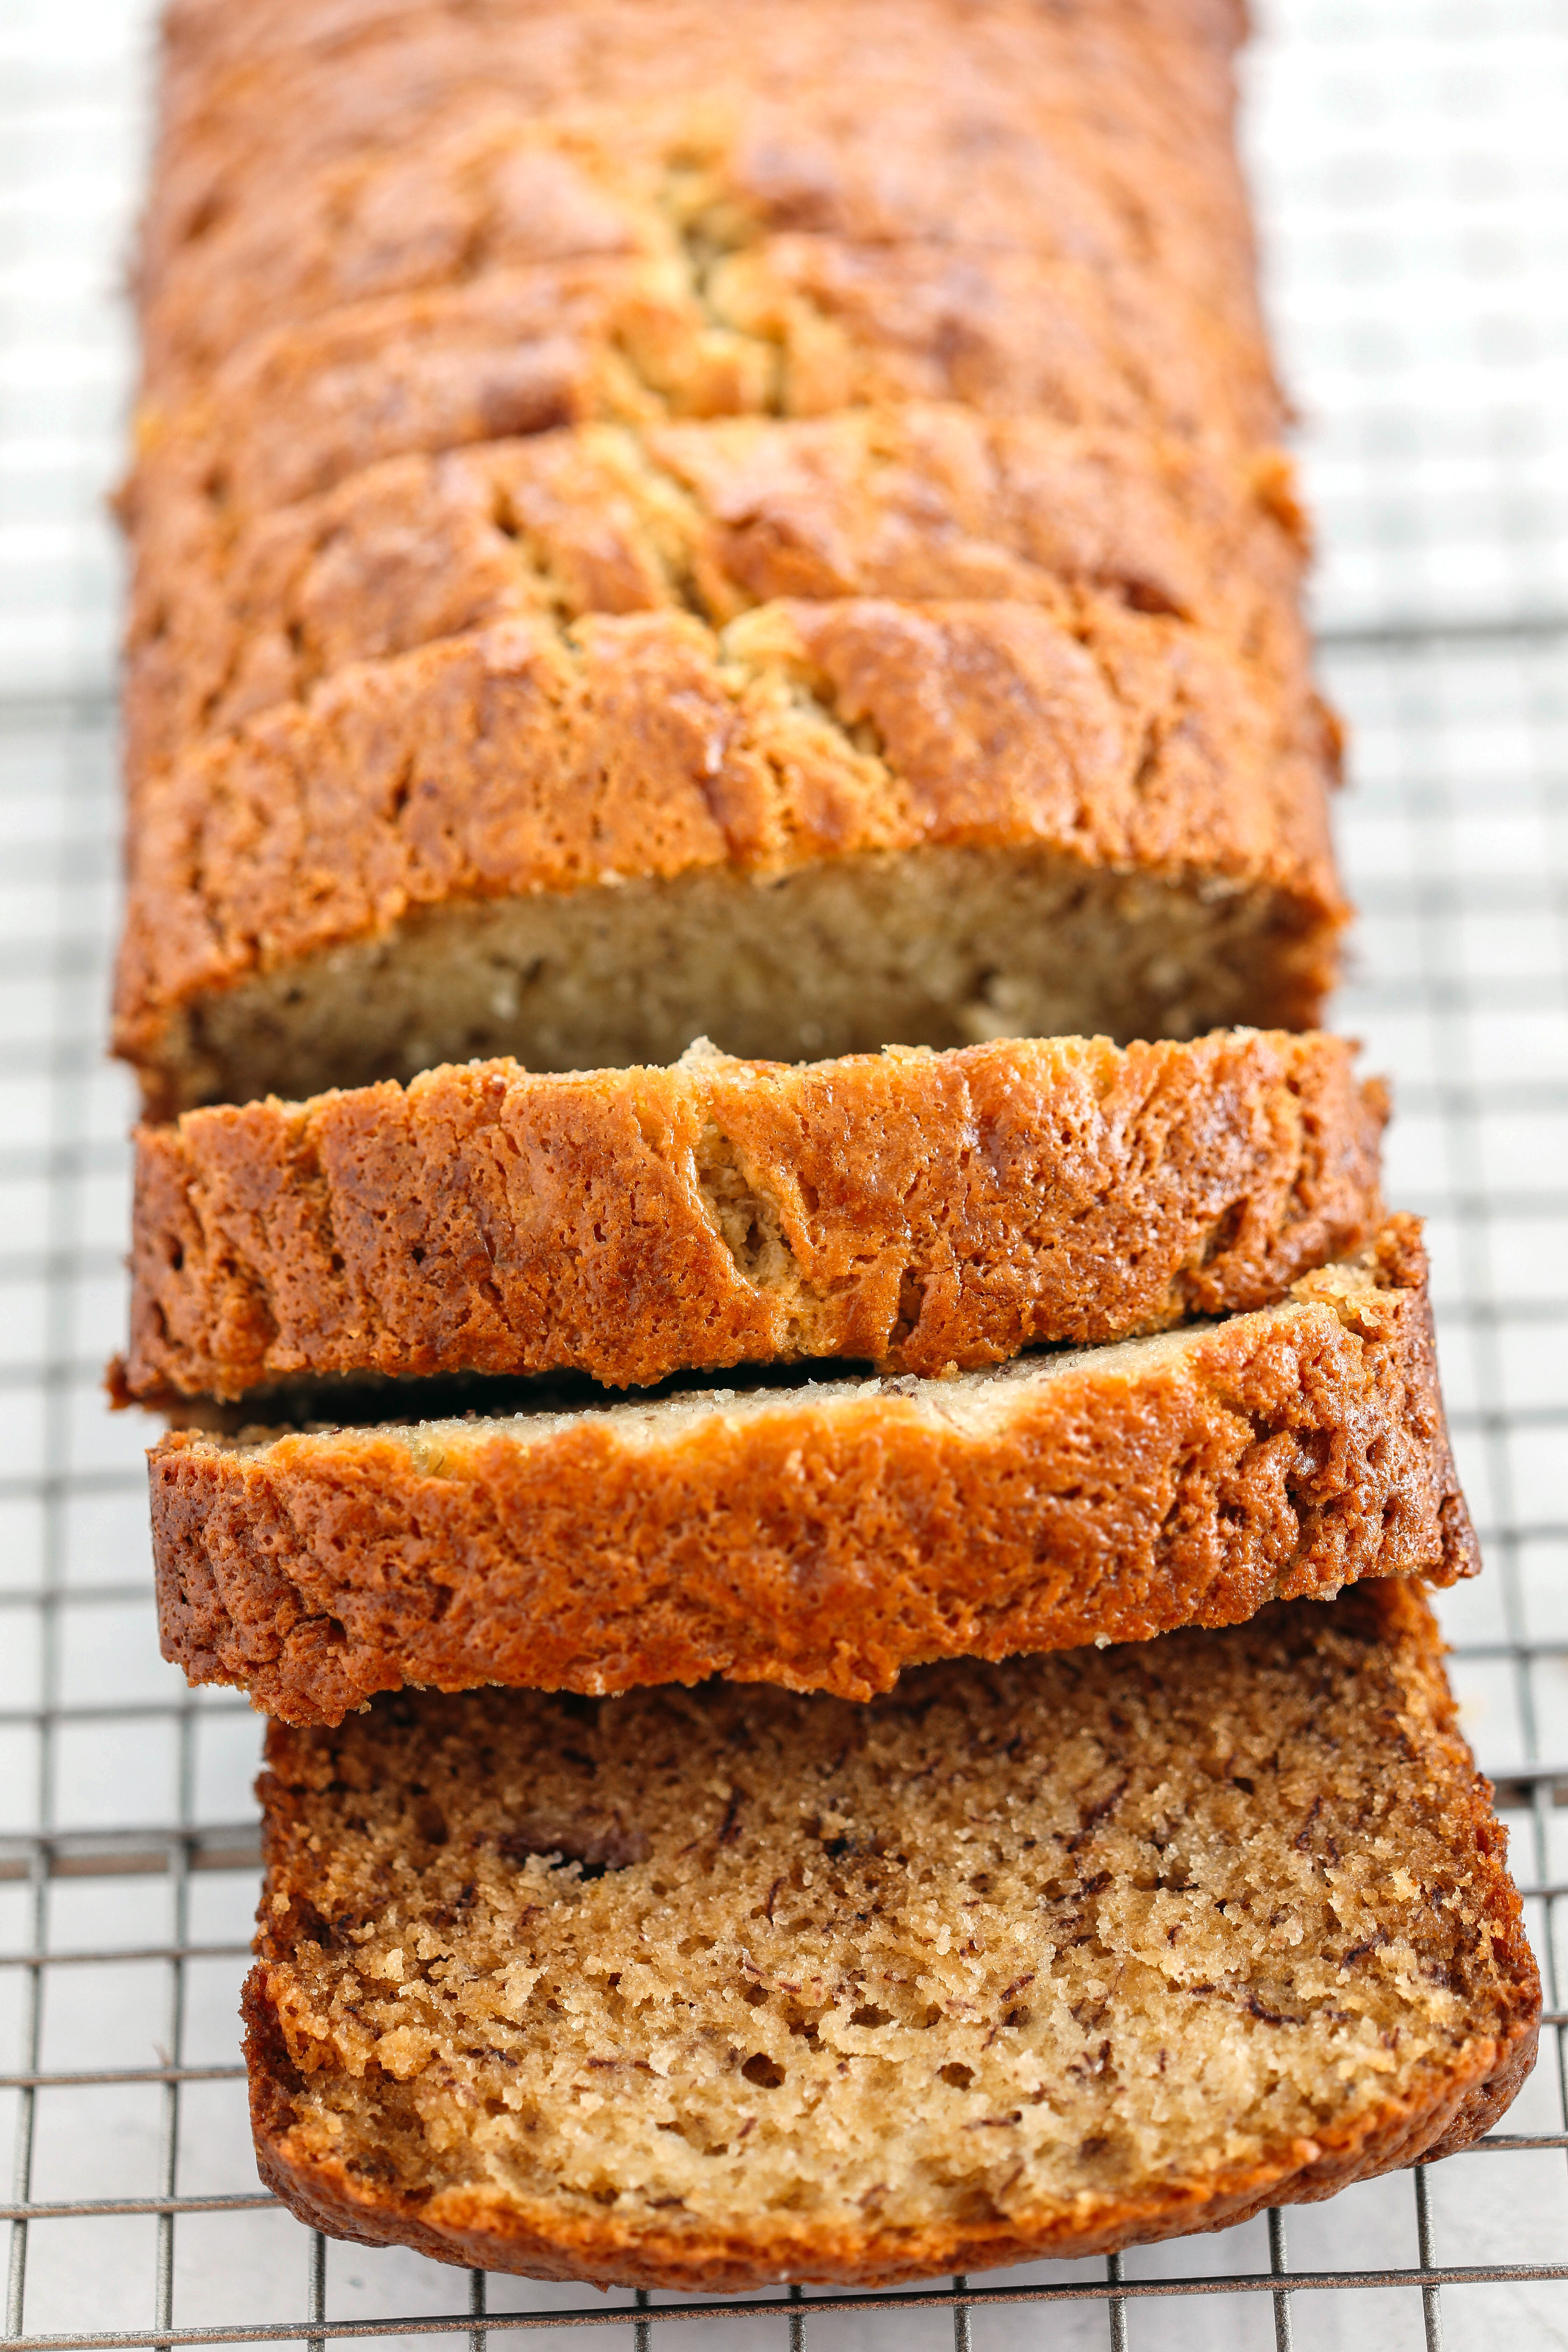 You will love my Grandma's tried and true banana bread recipe that is a classic favorite!  Perfectly sweet, moist and full of delicious banana flavor! 